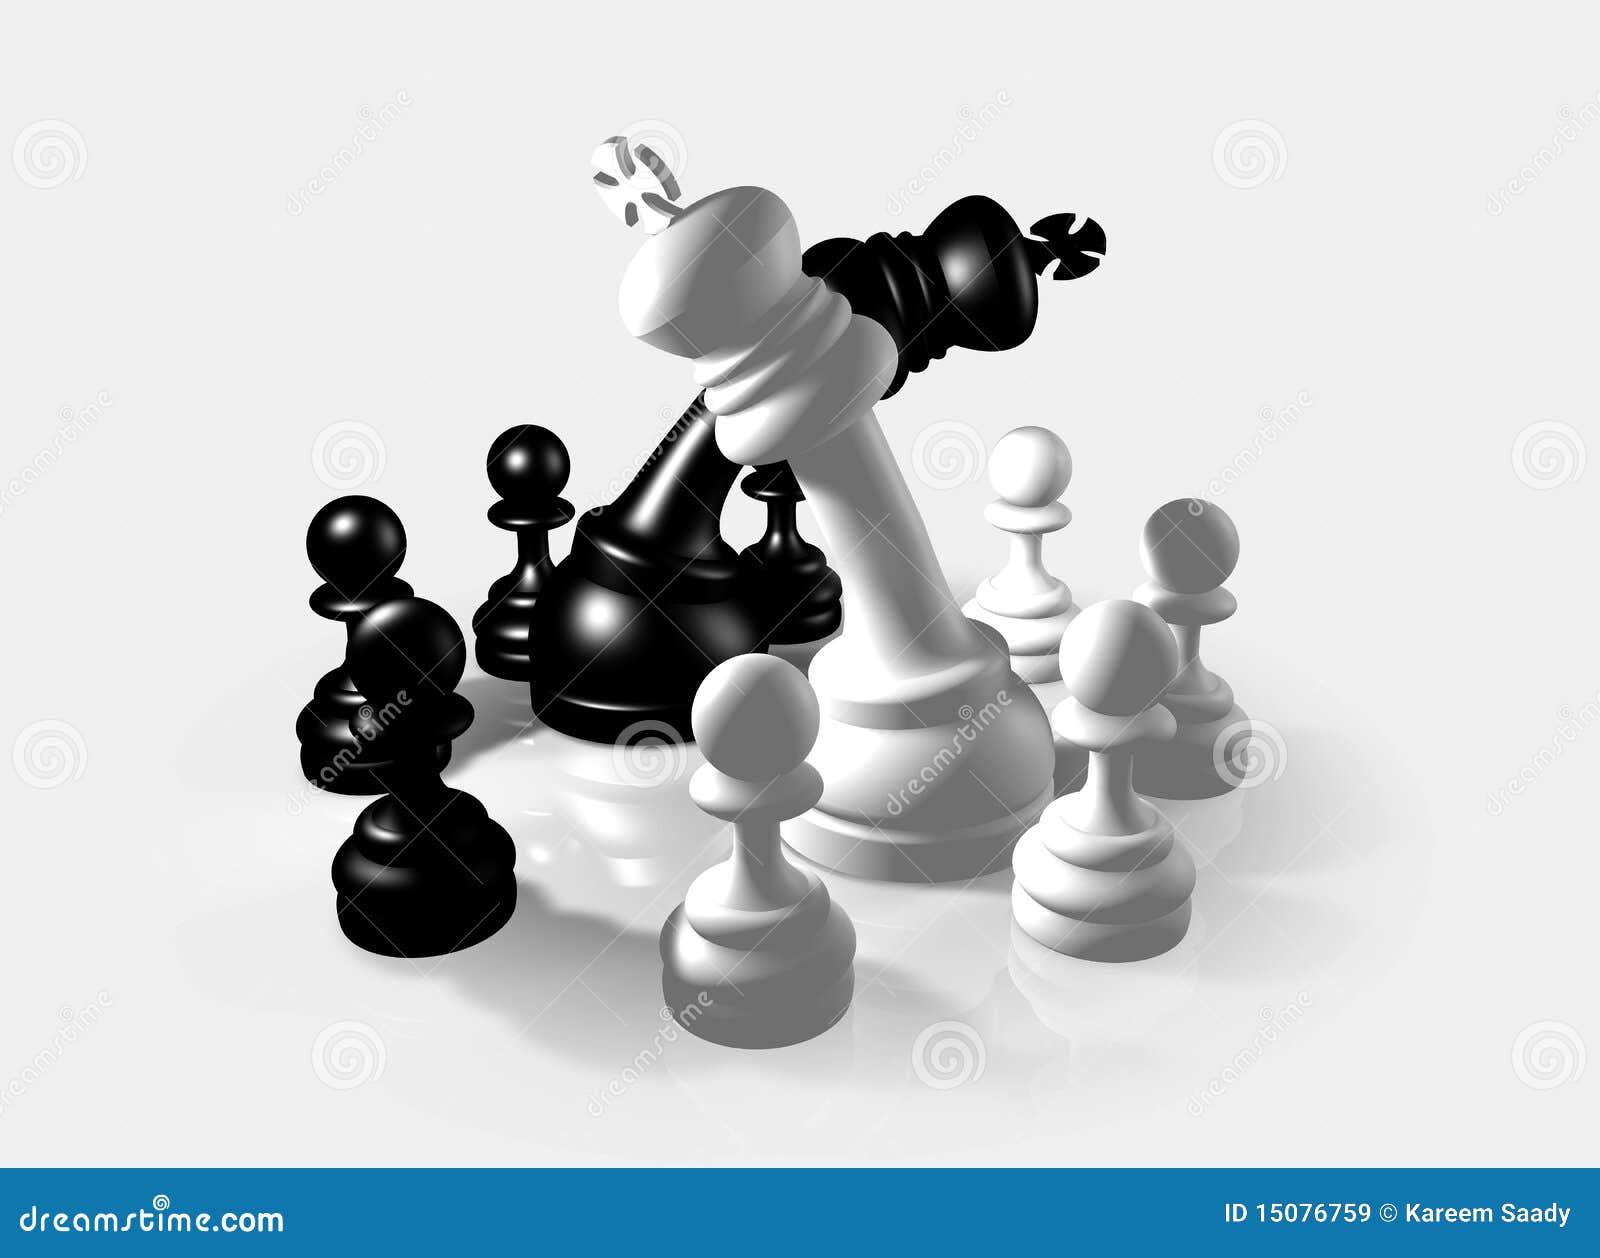 Chess Titans Chessboard Board Game PNG, Clipart, Board Game, Chess,  Chessboard, Chess Piece, Chess Table Free